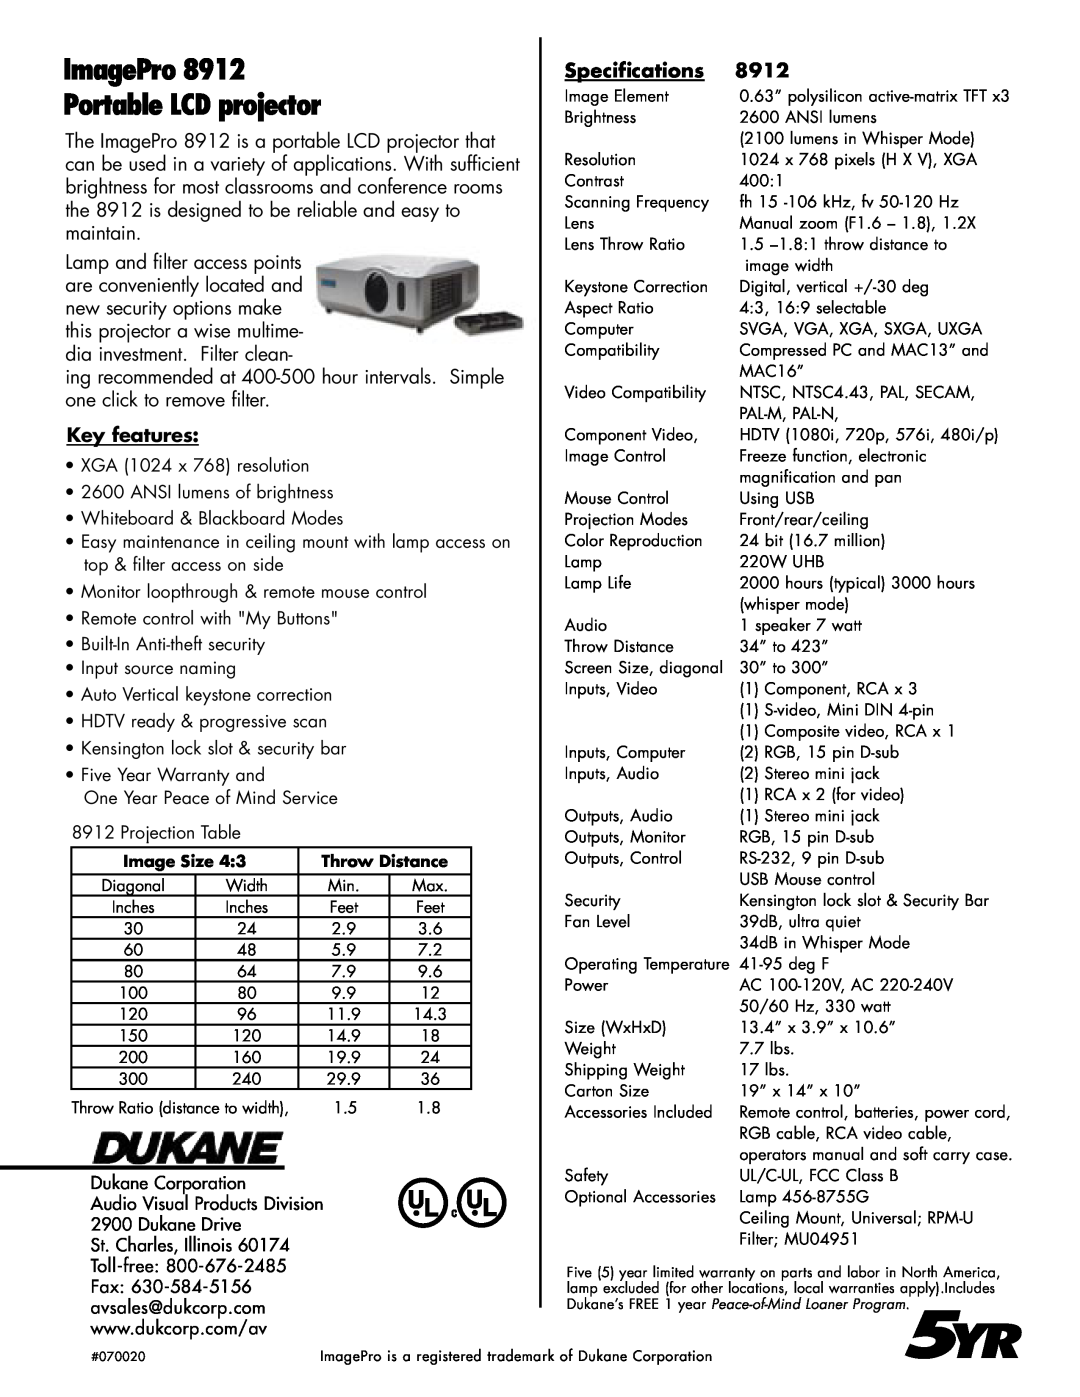 Dukane 8912 manual ImagePro Portable LCD projector, Key features, Specifications 